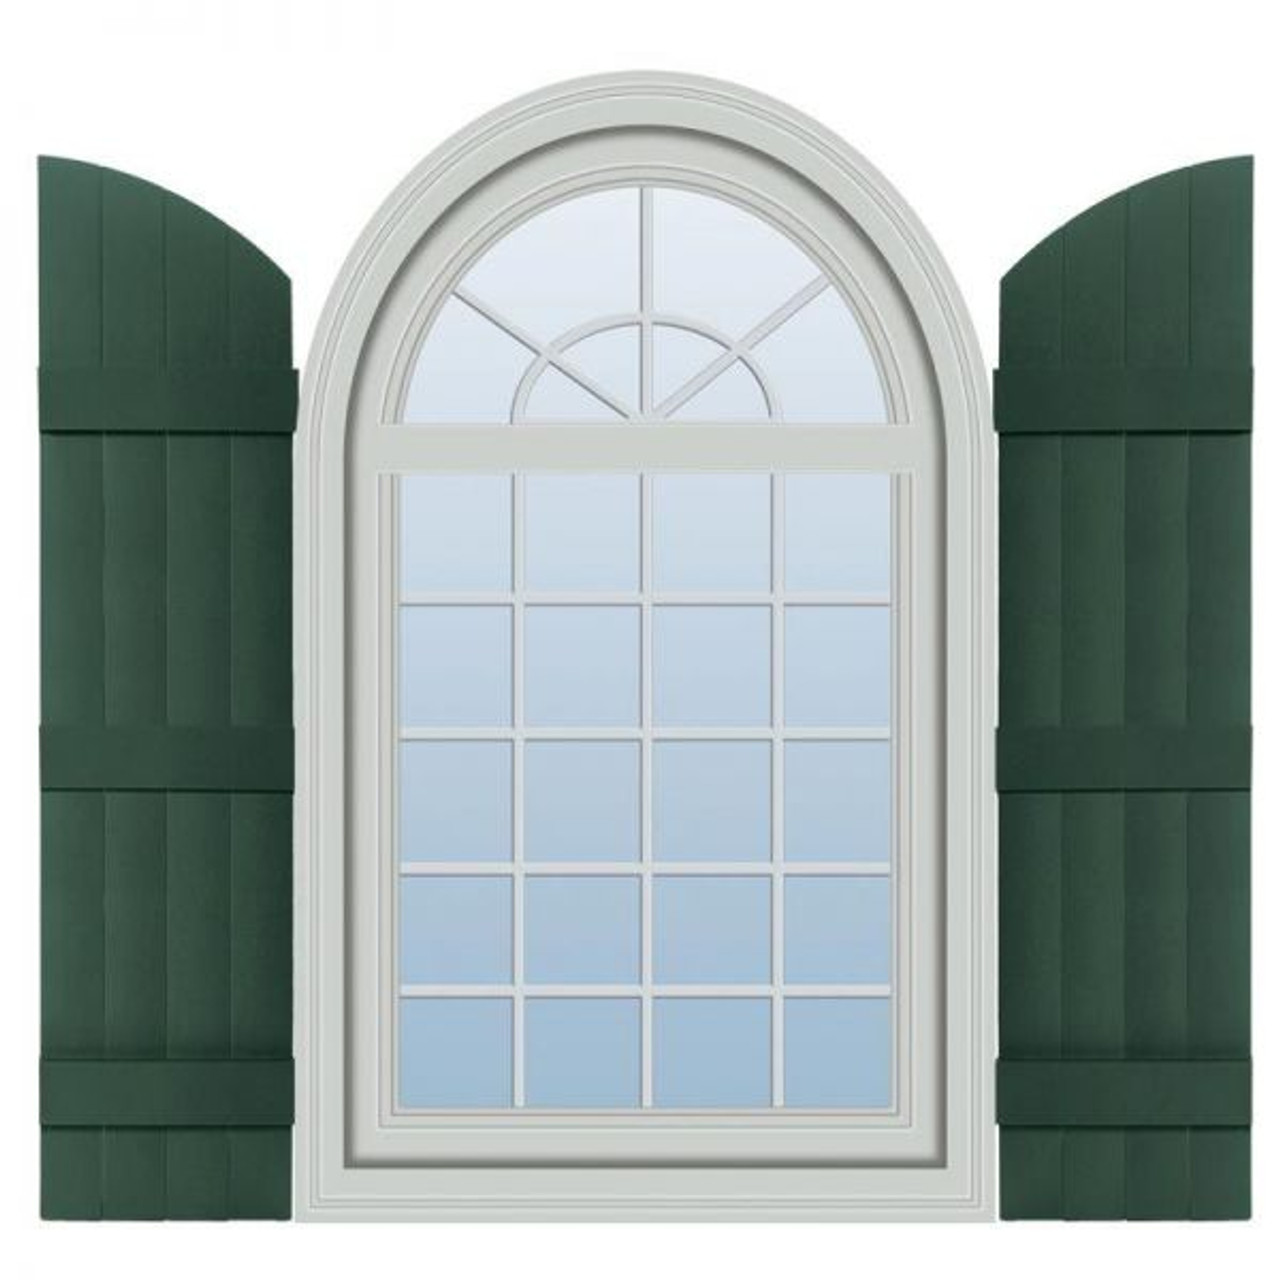 Vinyl 14" Wide - 4 Boards Joined Top Shutter Pair